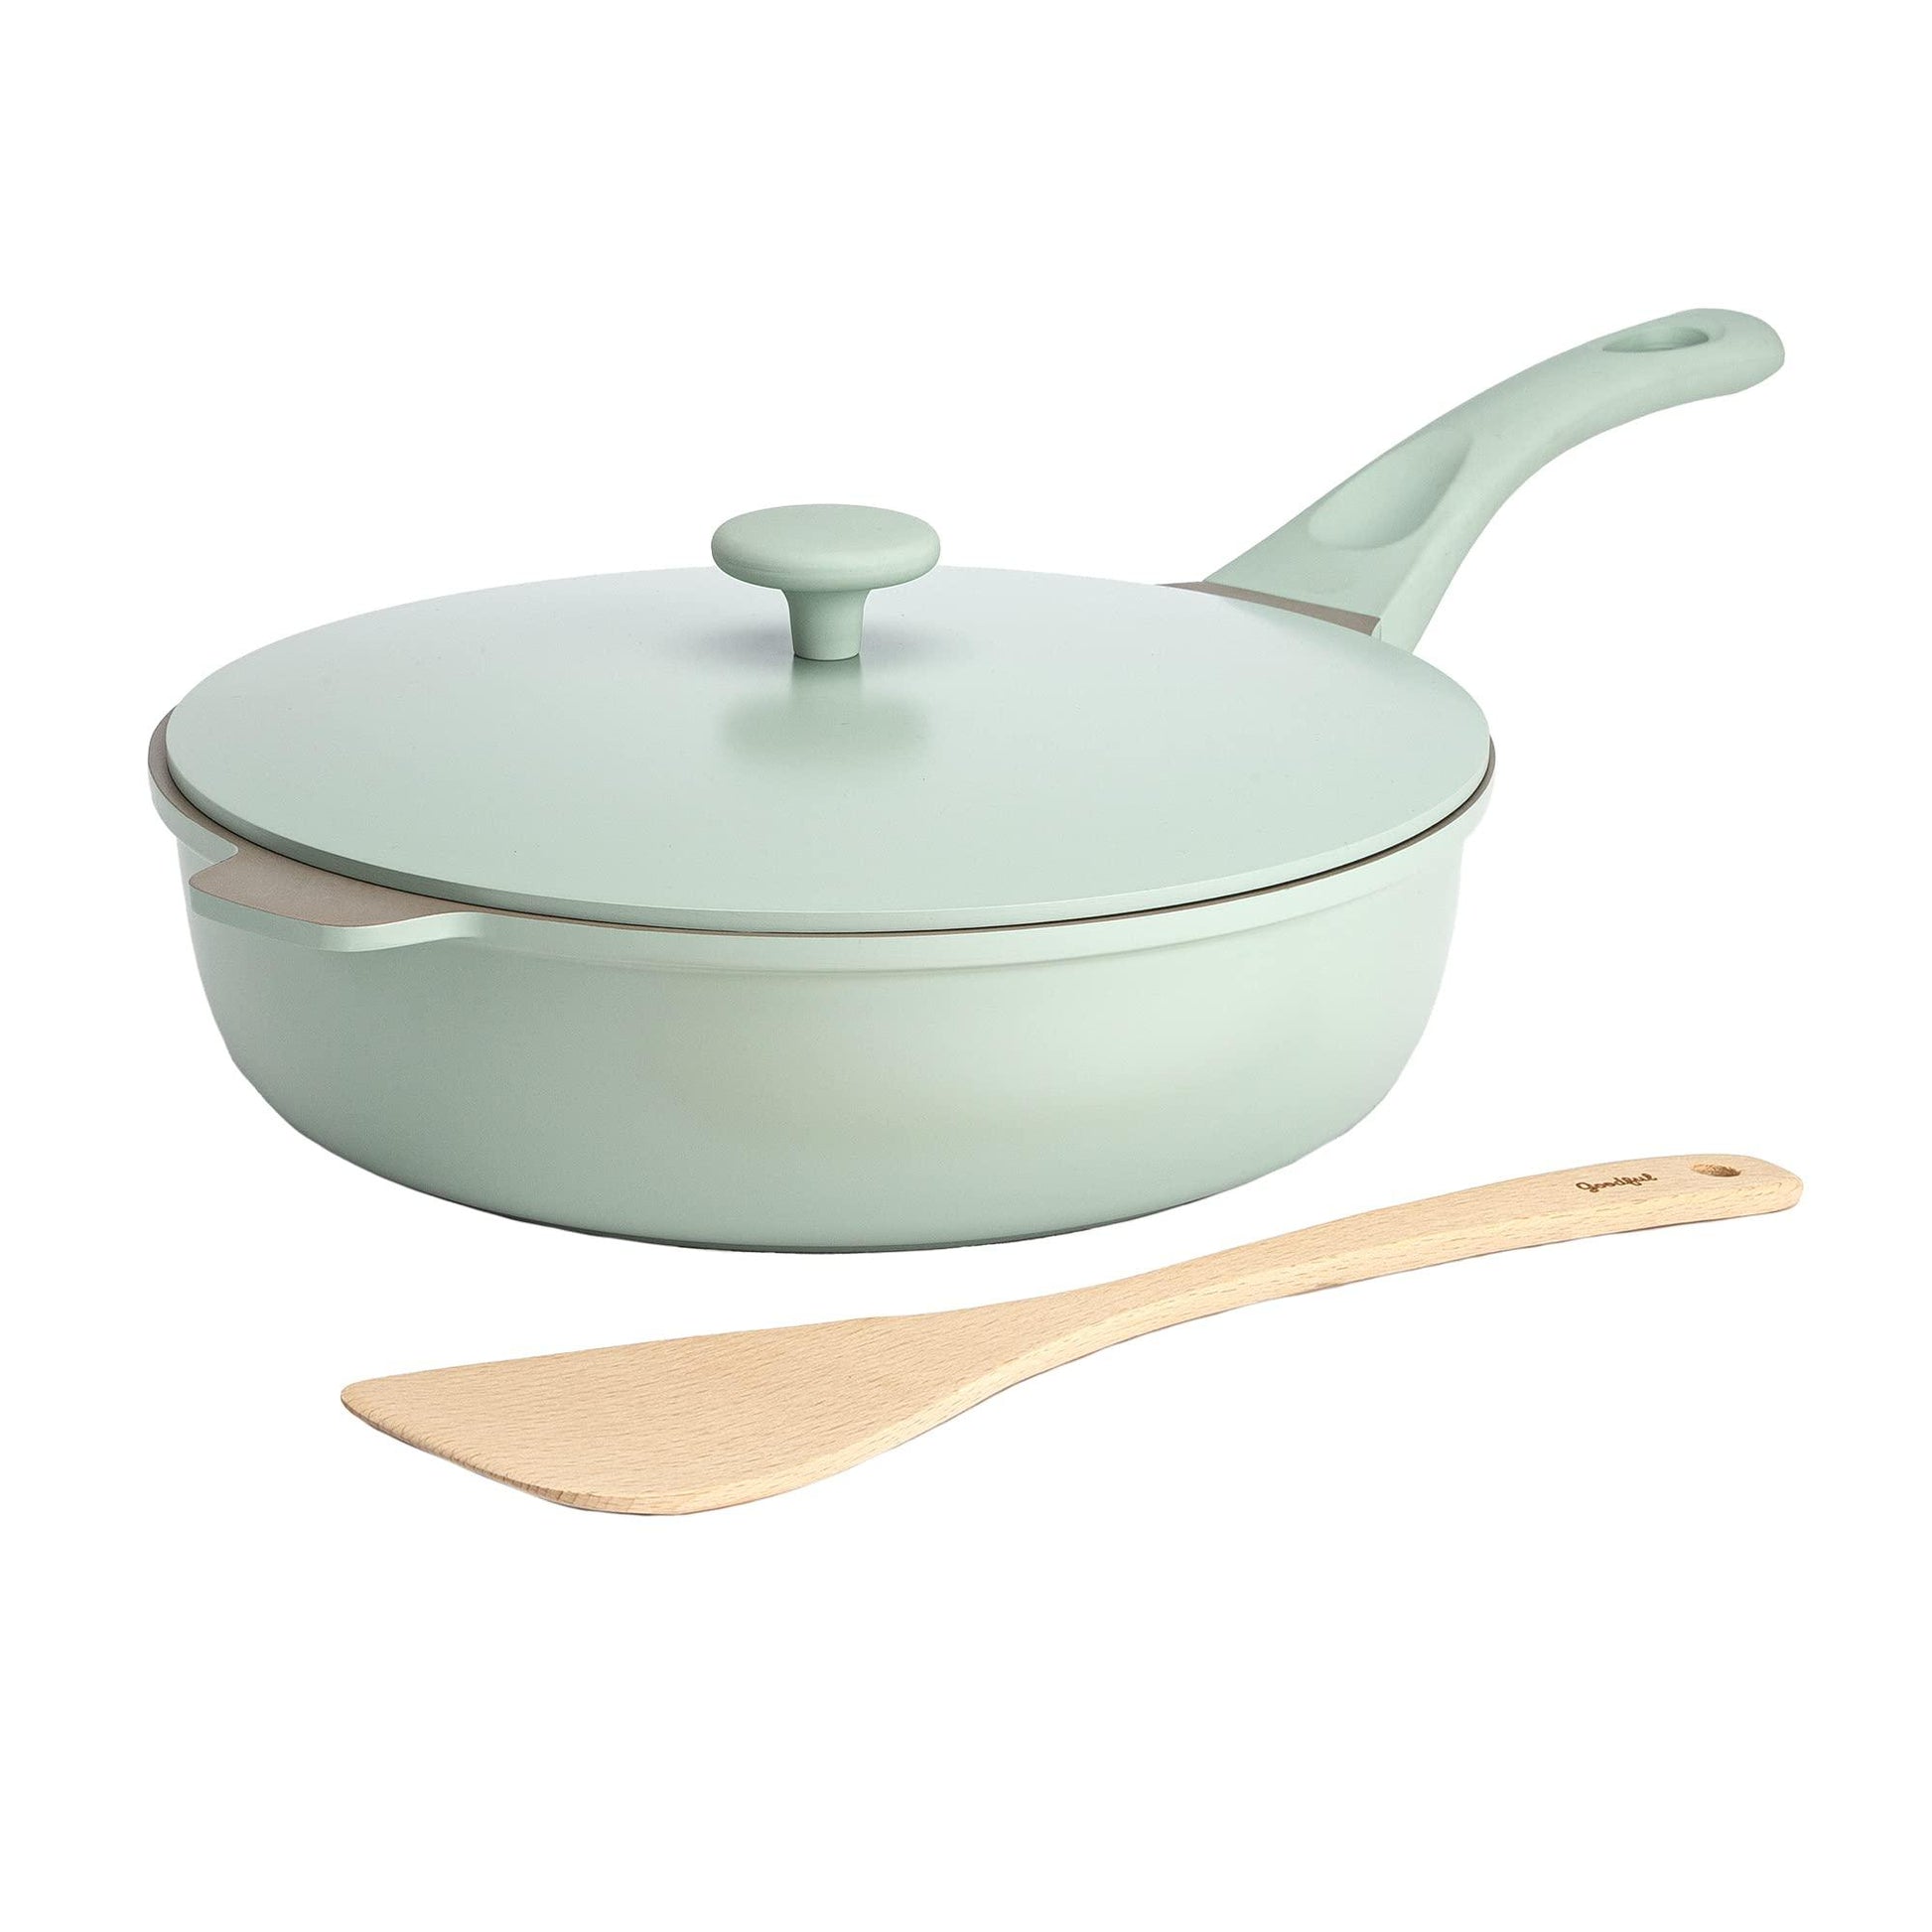 Goodful All-in-One Pan, Multilayer Nonstick, High-Performance Cast Construction, Multipurpose Design Replaces Multiple Pots and Pans, Dishwasher Safe Cookware, 11-Inch, 4.4-Quart Capacity, Sage Green - CookCave